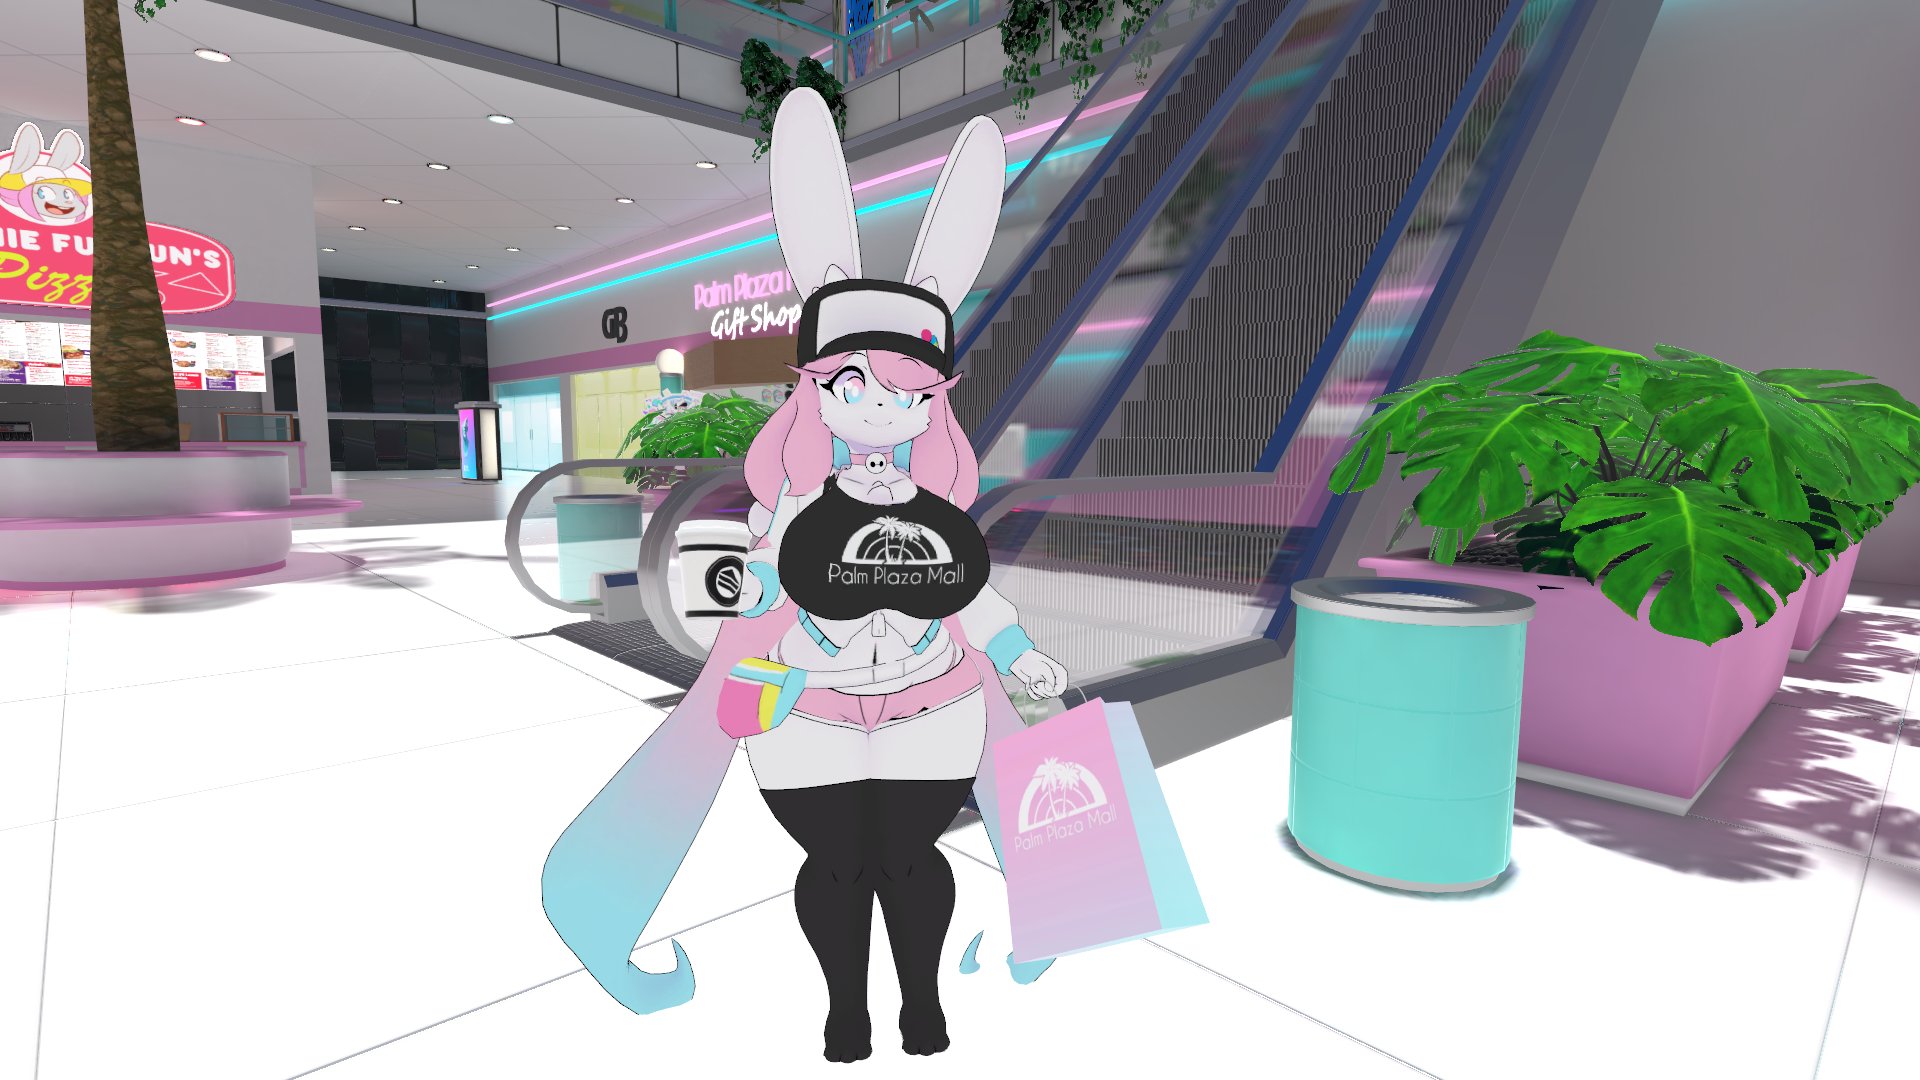 Cake  ( MFF) on Twitter: hi do you like vaporwave/malls then you  should check out my VRChat mall twitter https://t.co/c4TEy7sKL1 I've made a  huge series of interconnected mall worlds in VRChat